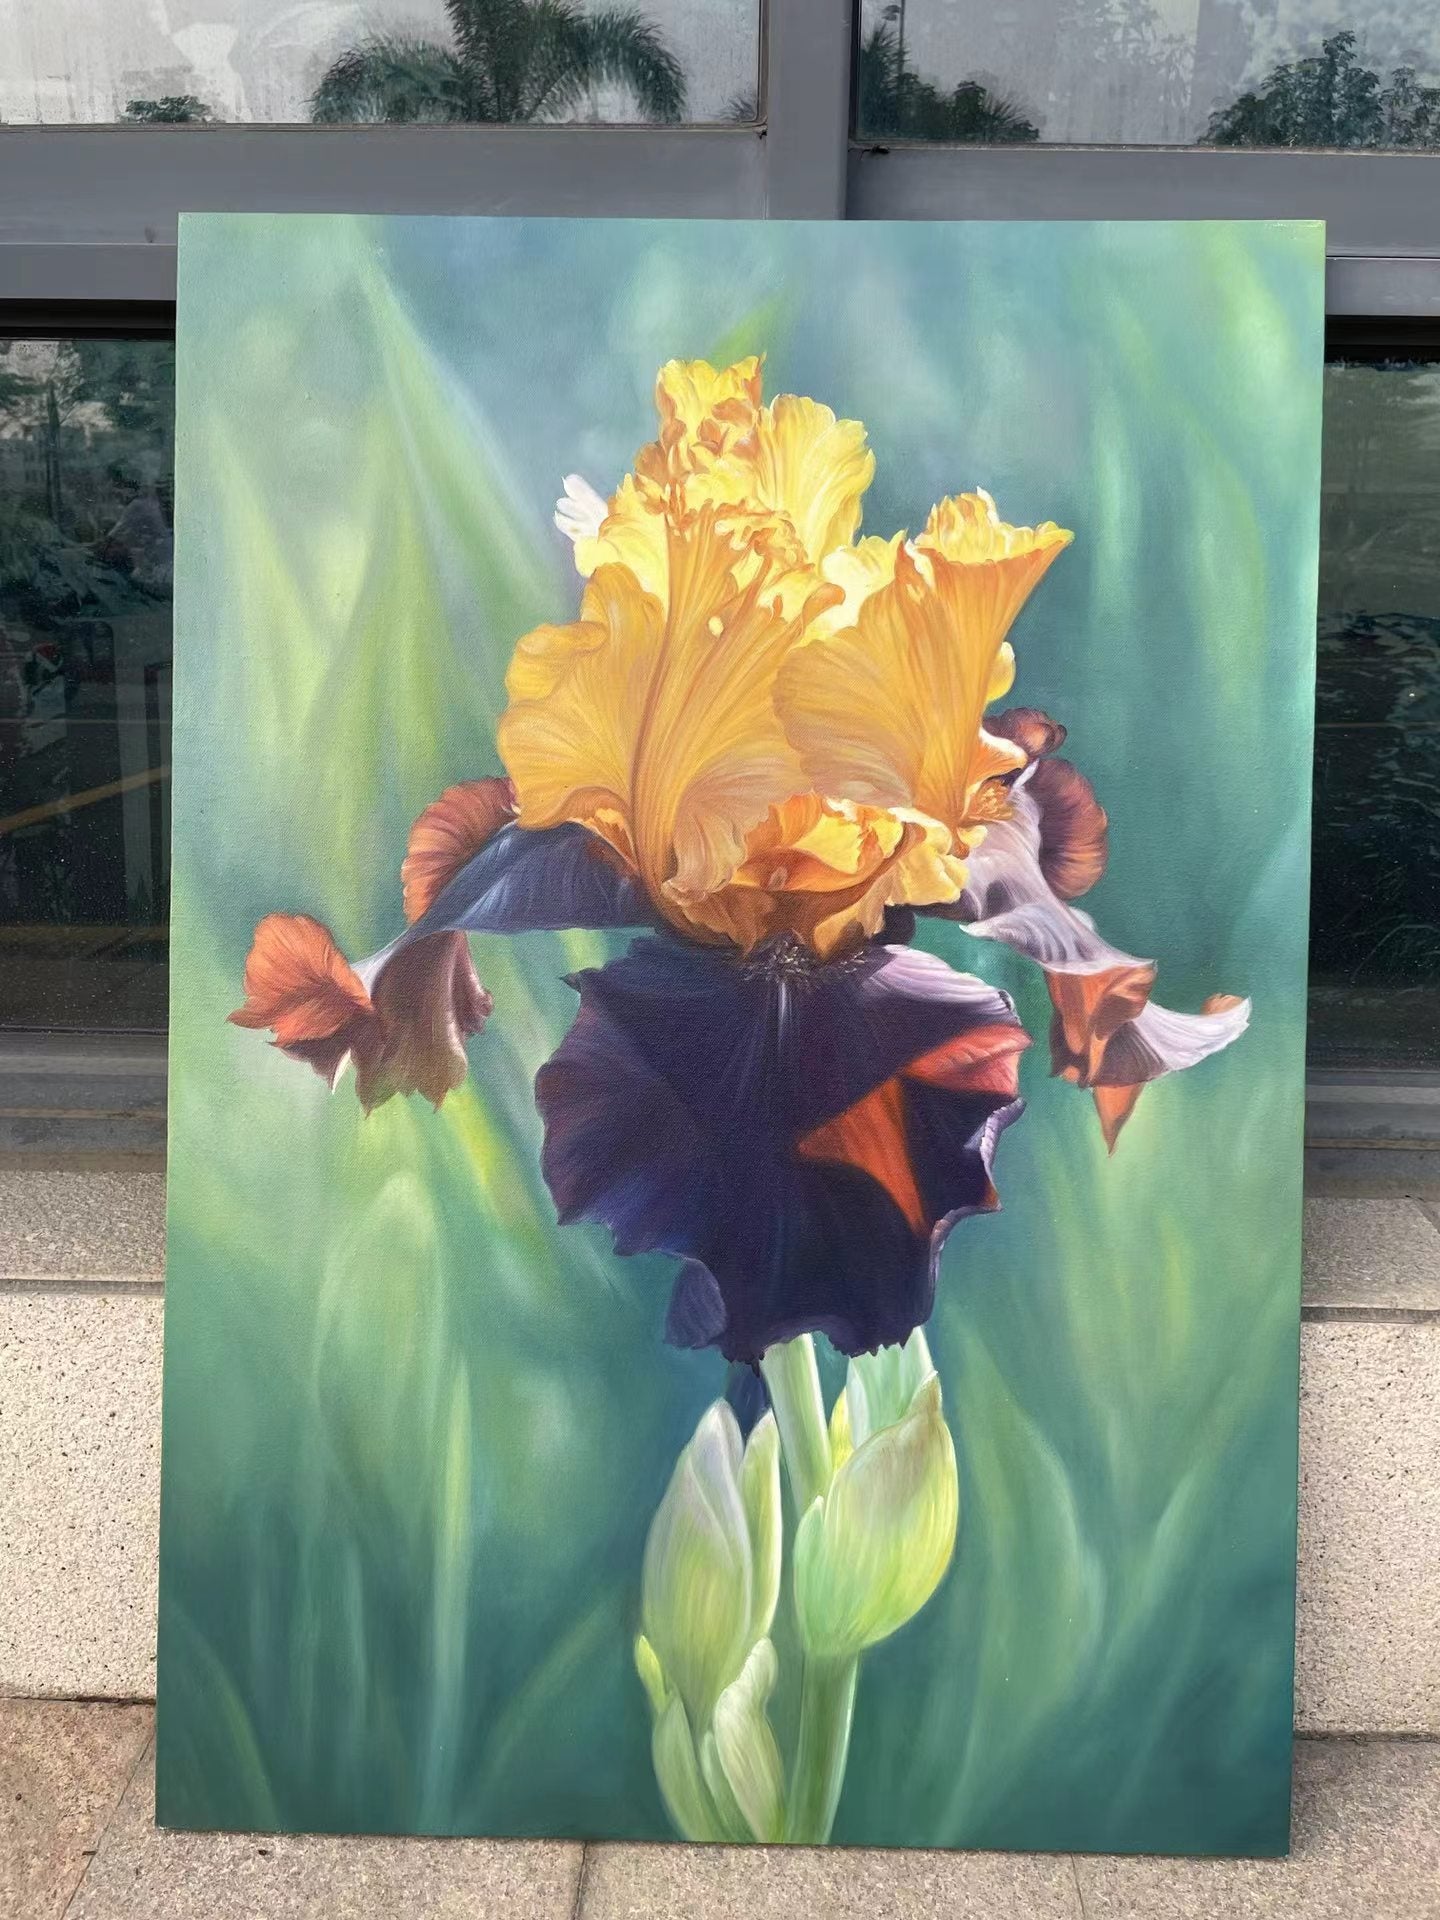 Realistic Flower 100% Handmade Oil Painting on Canvas Wall Decor 28 by 39 M2027